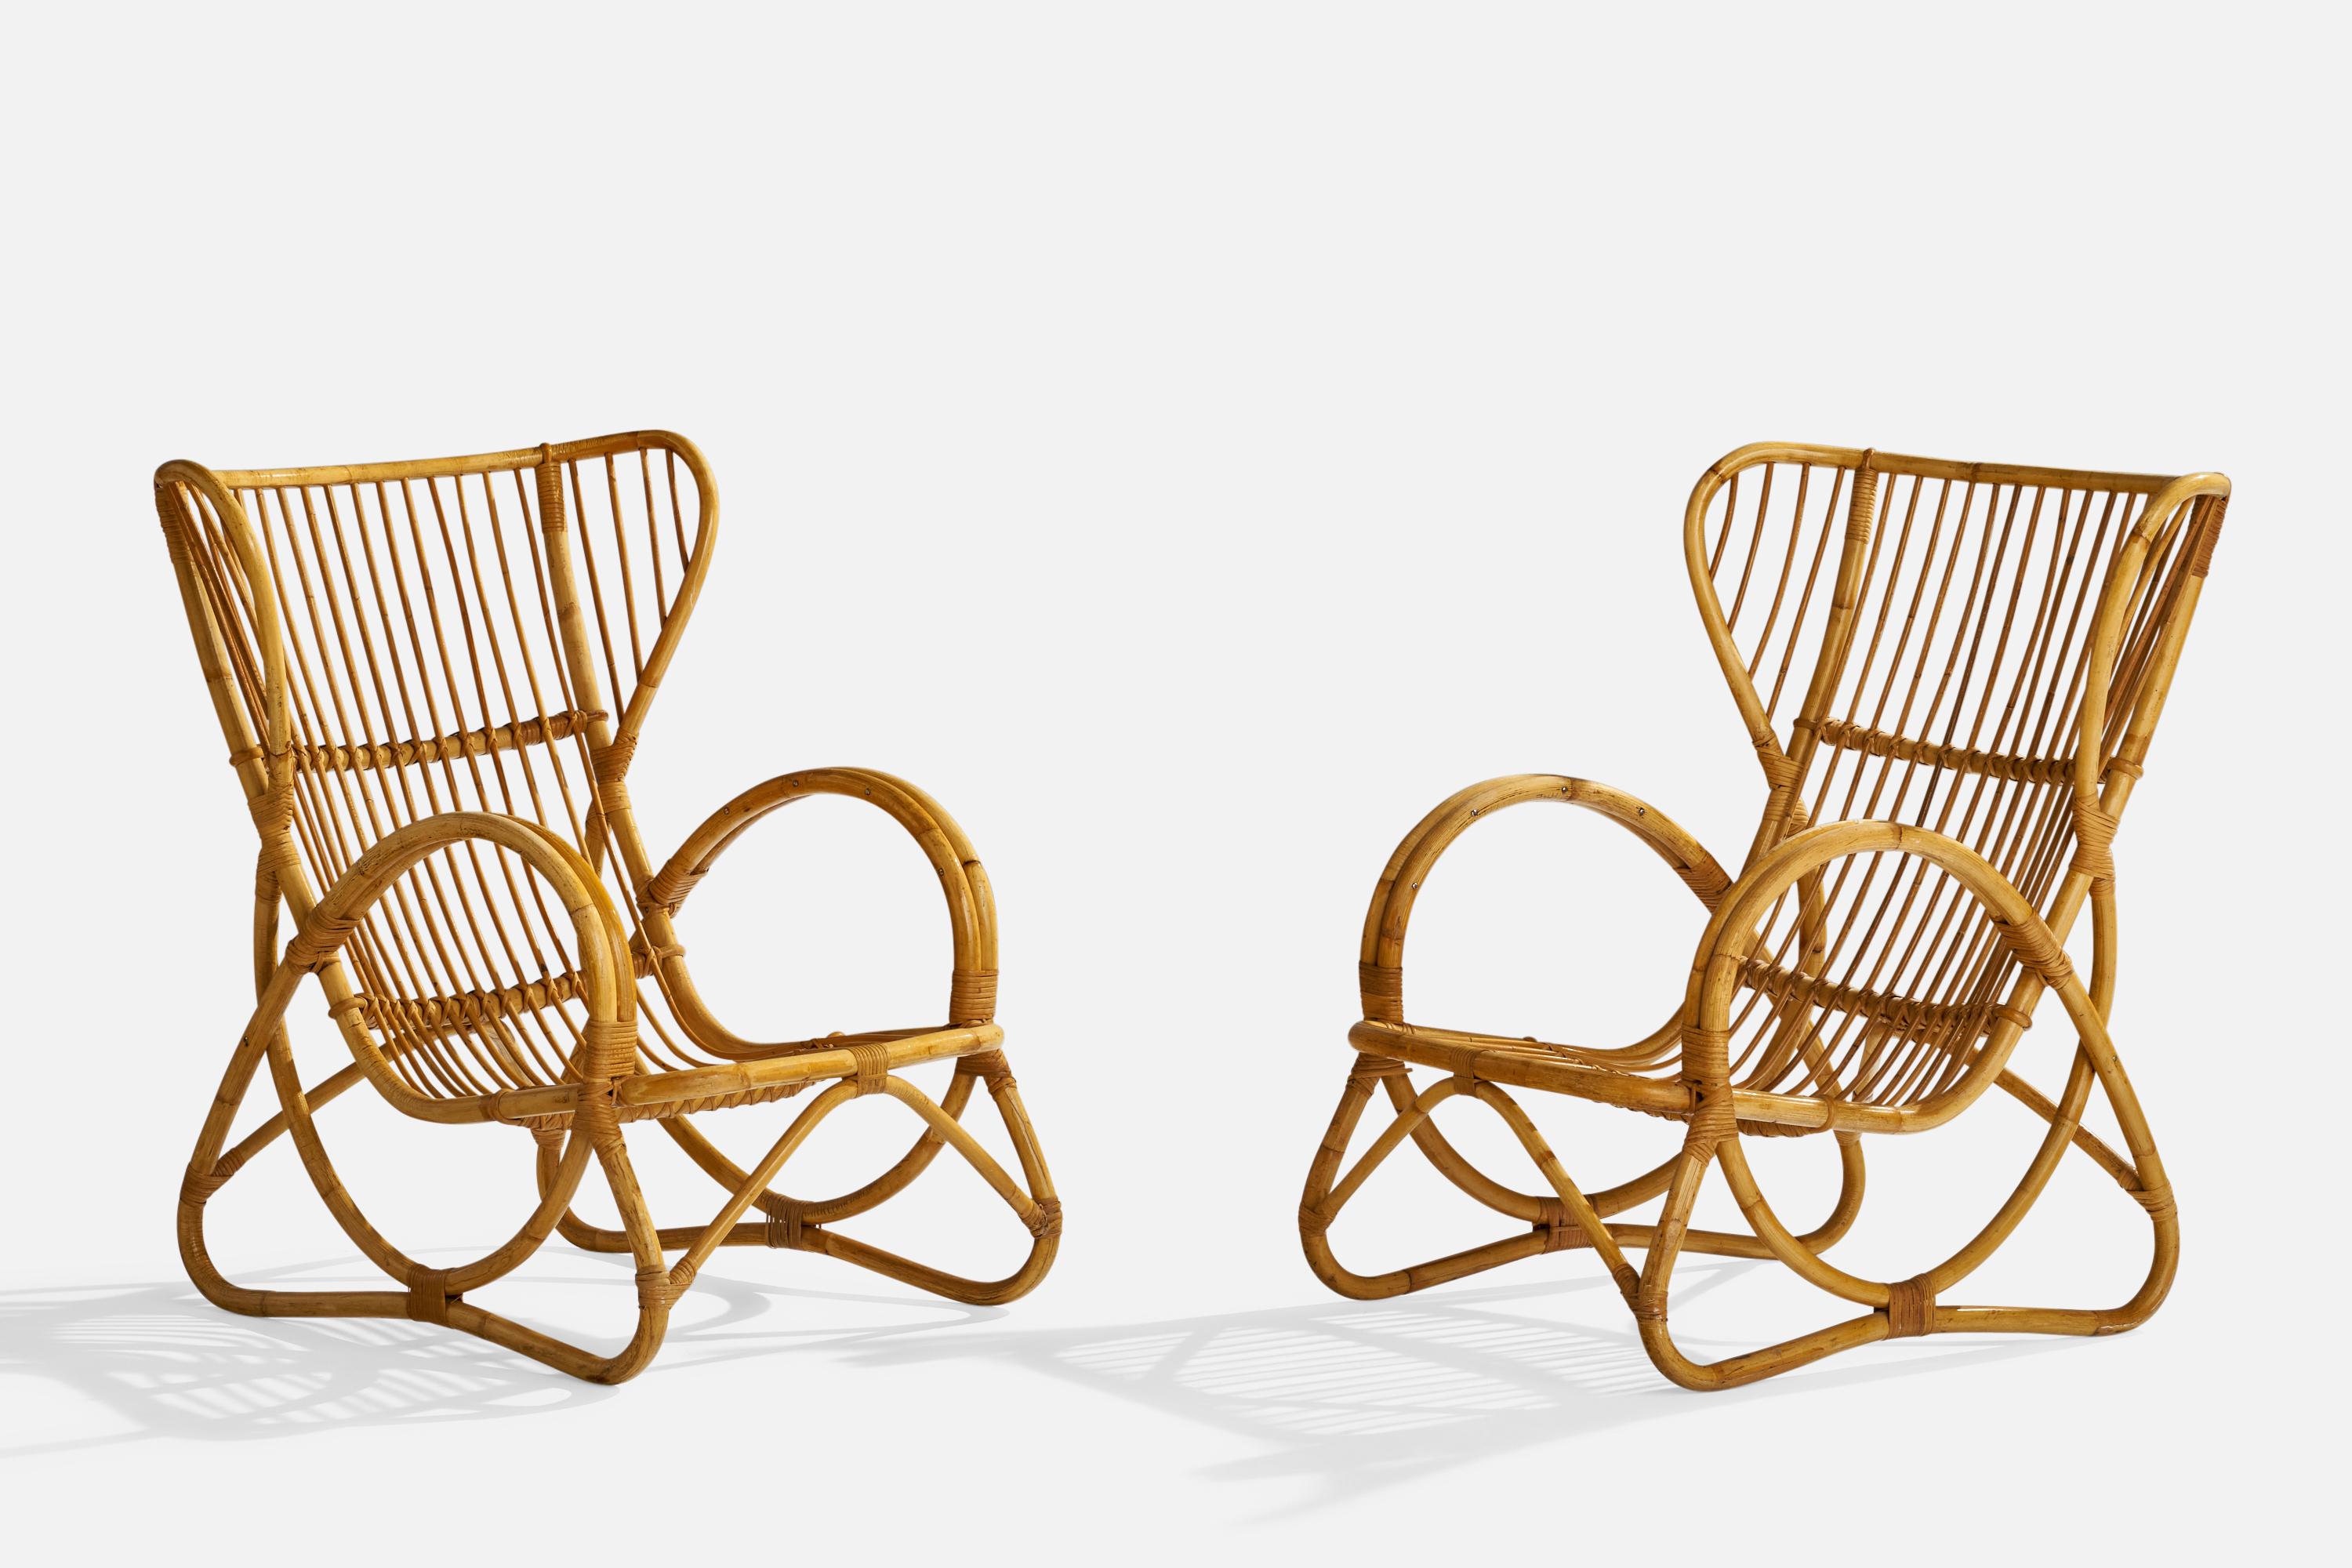 A pair of bamboo and rattan lounge chairs designed and produced in Sweden, 1950s.

Seat height 12.5”